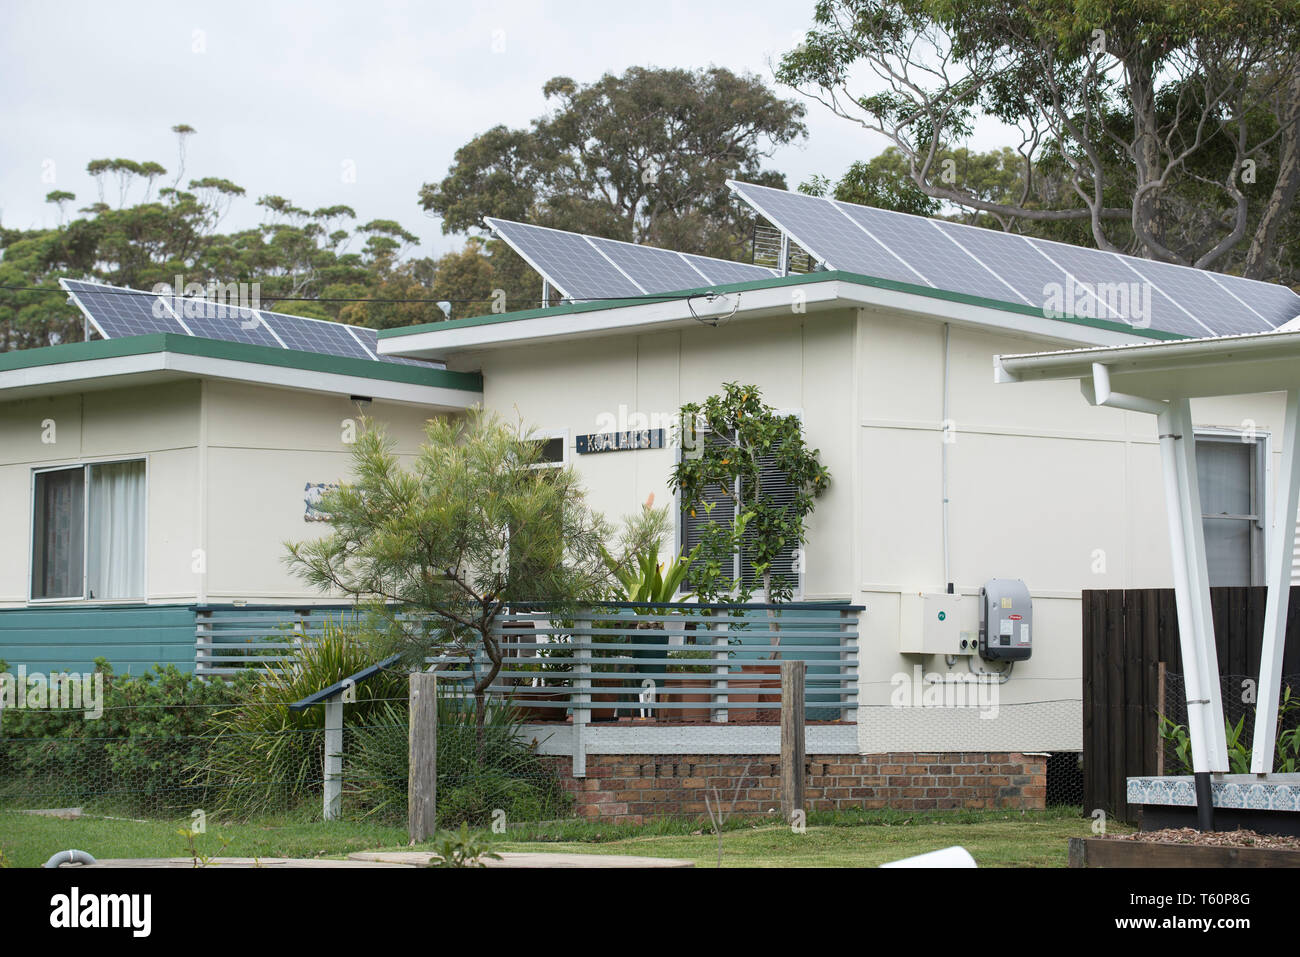 A renovated 1950's fibro (Asbestos fibrous cement) home with solar panels on its roof in the NSW south coast village of Kioloa Stock Photo